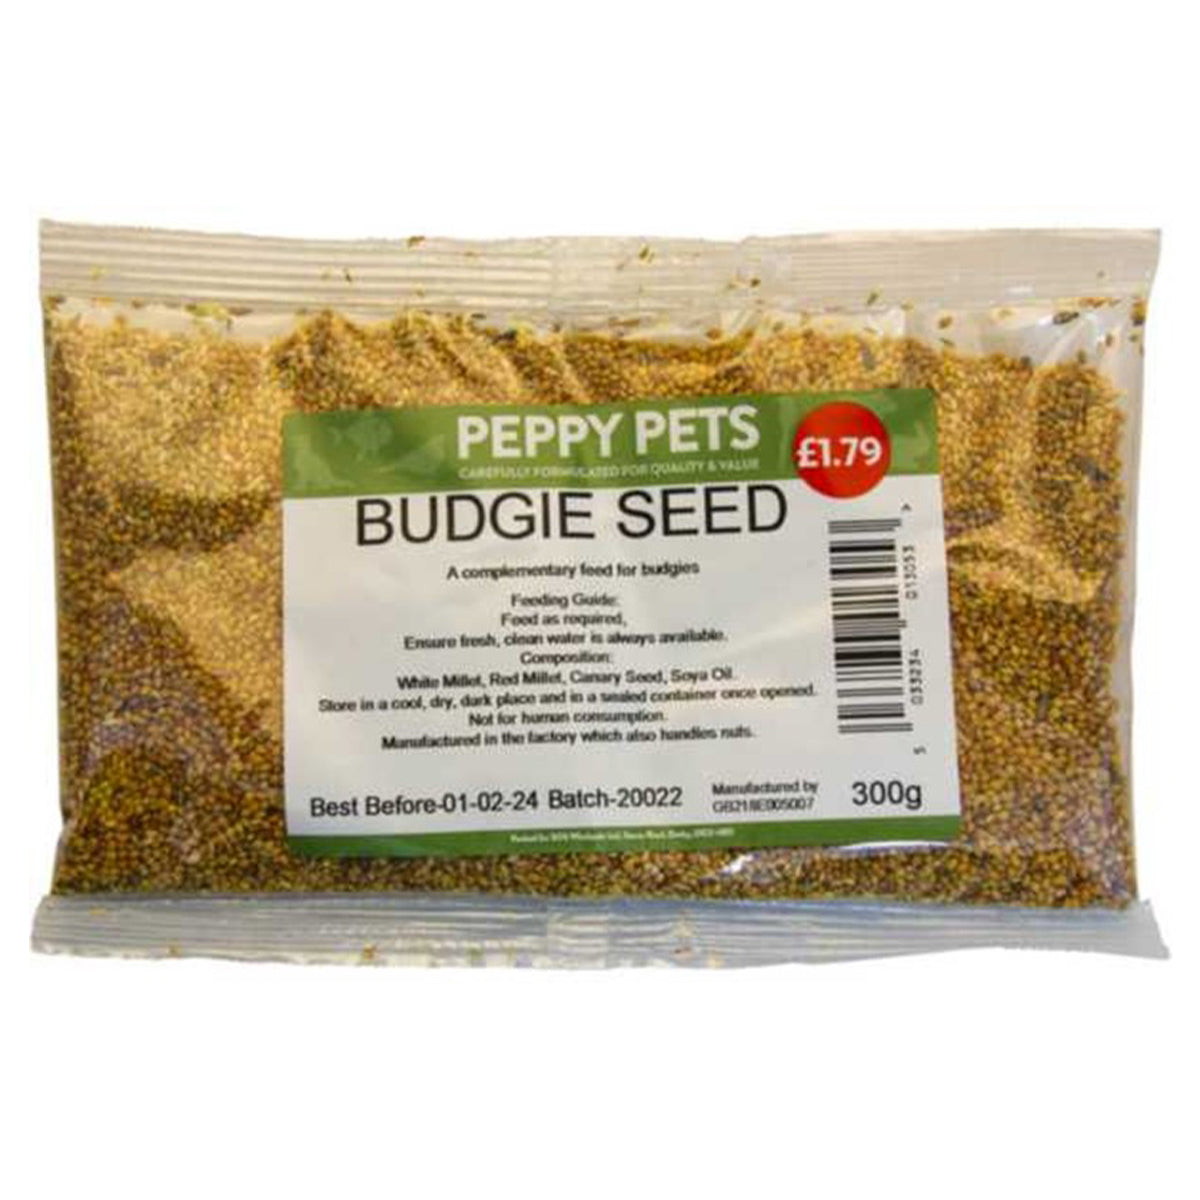 Peppy Pets - Budgie Seed - 300g - Continental Food Store